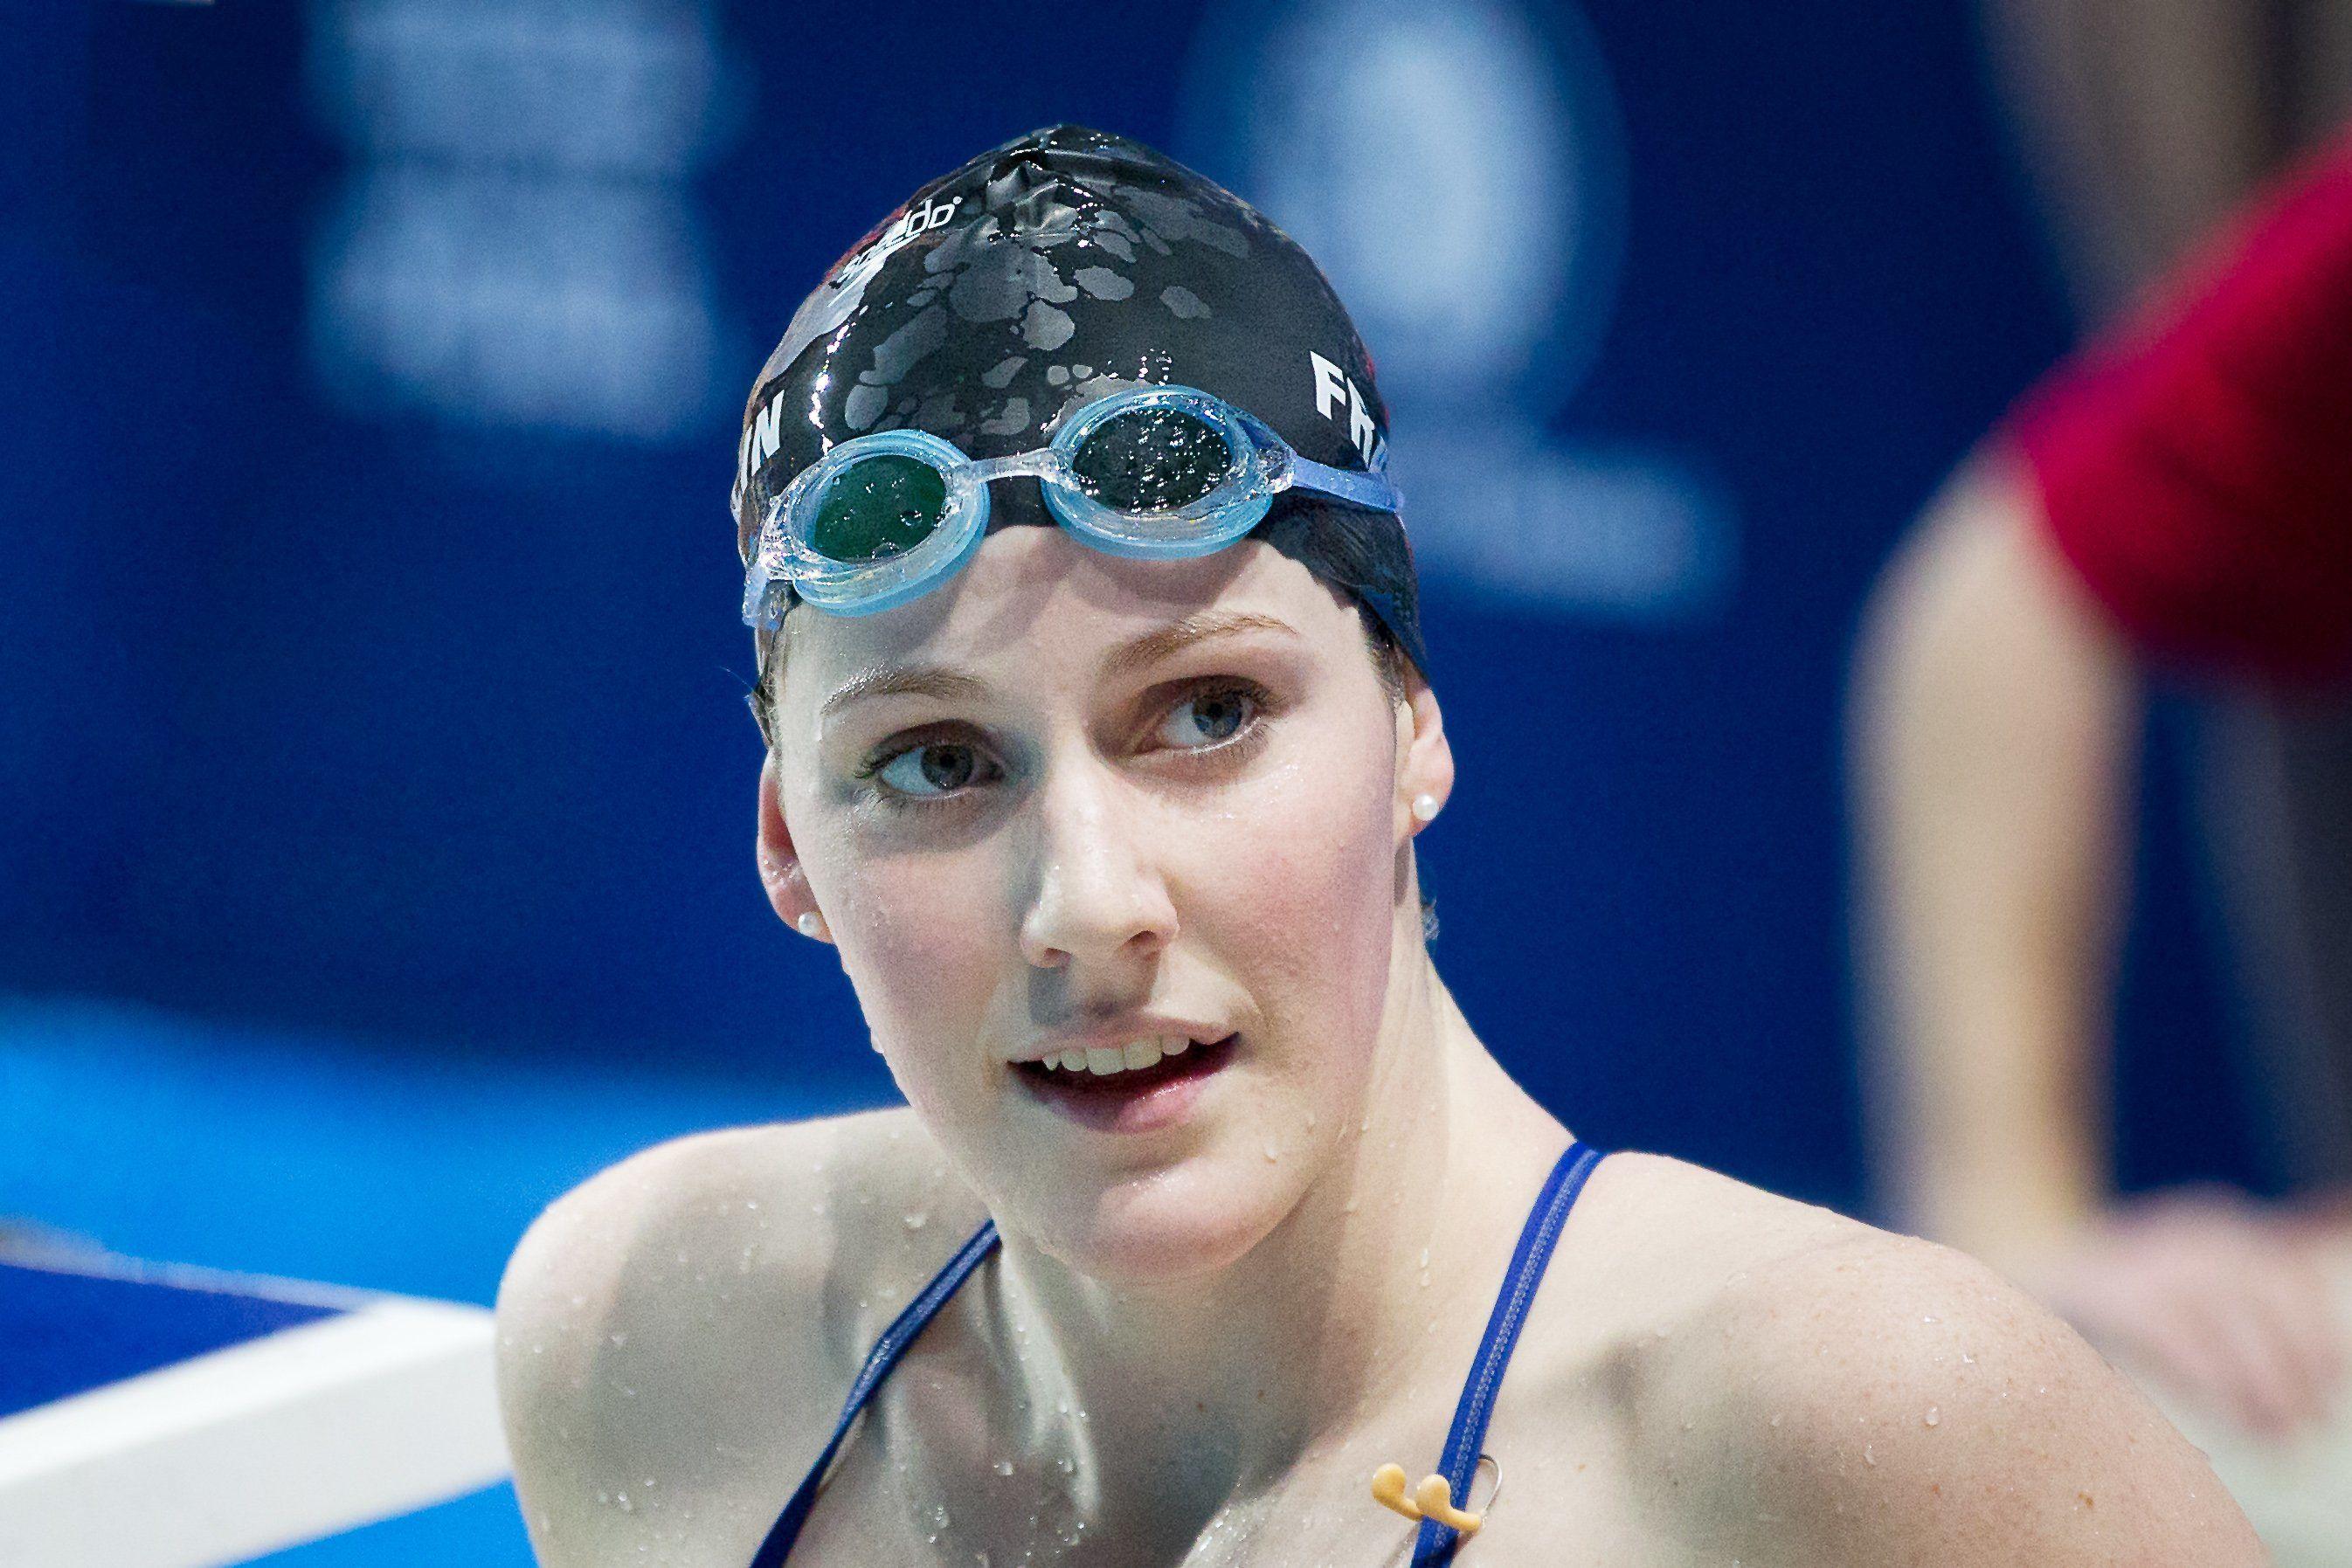 Missy Franklin Subtly Makes First Endorsement As A Professional Swimmer